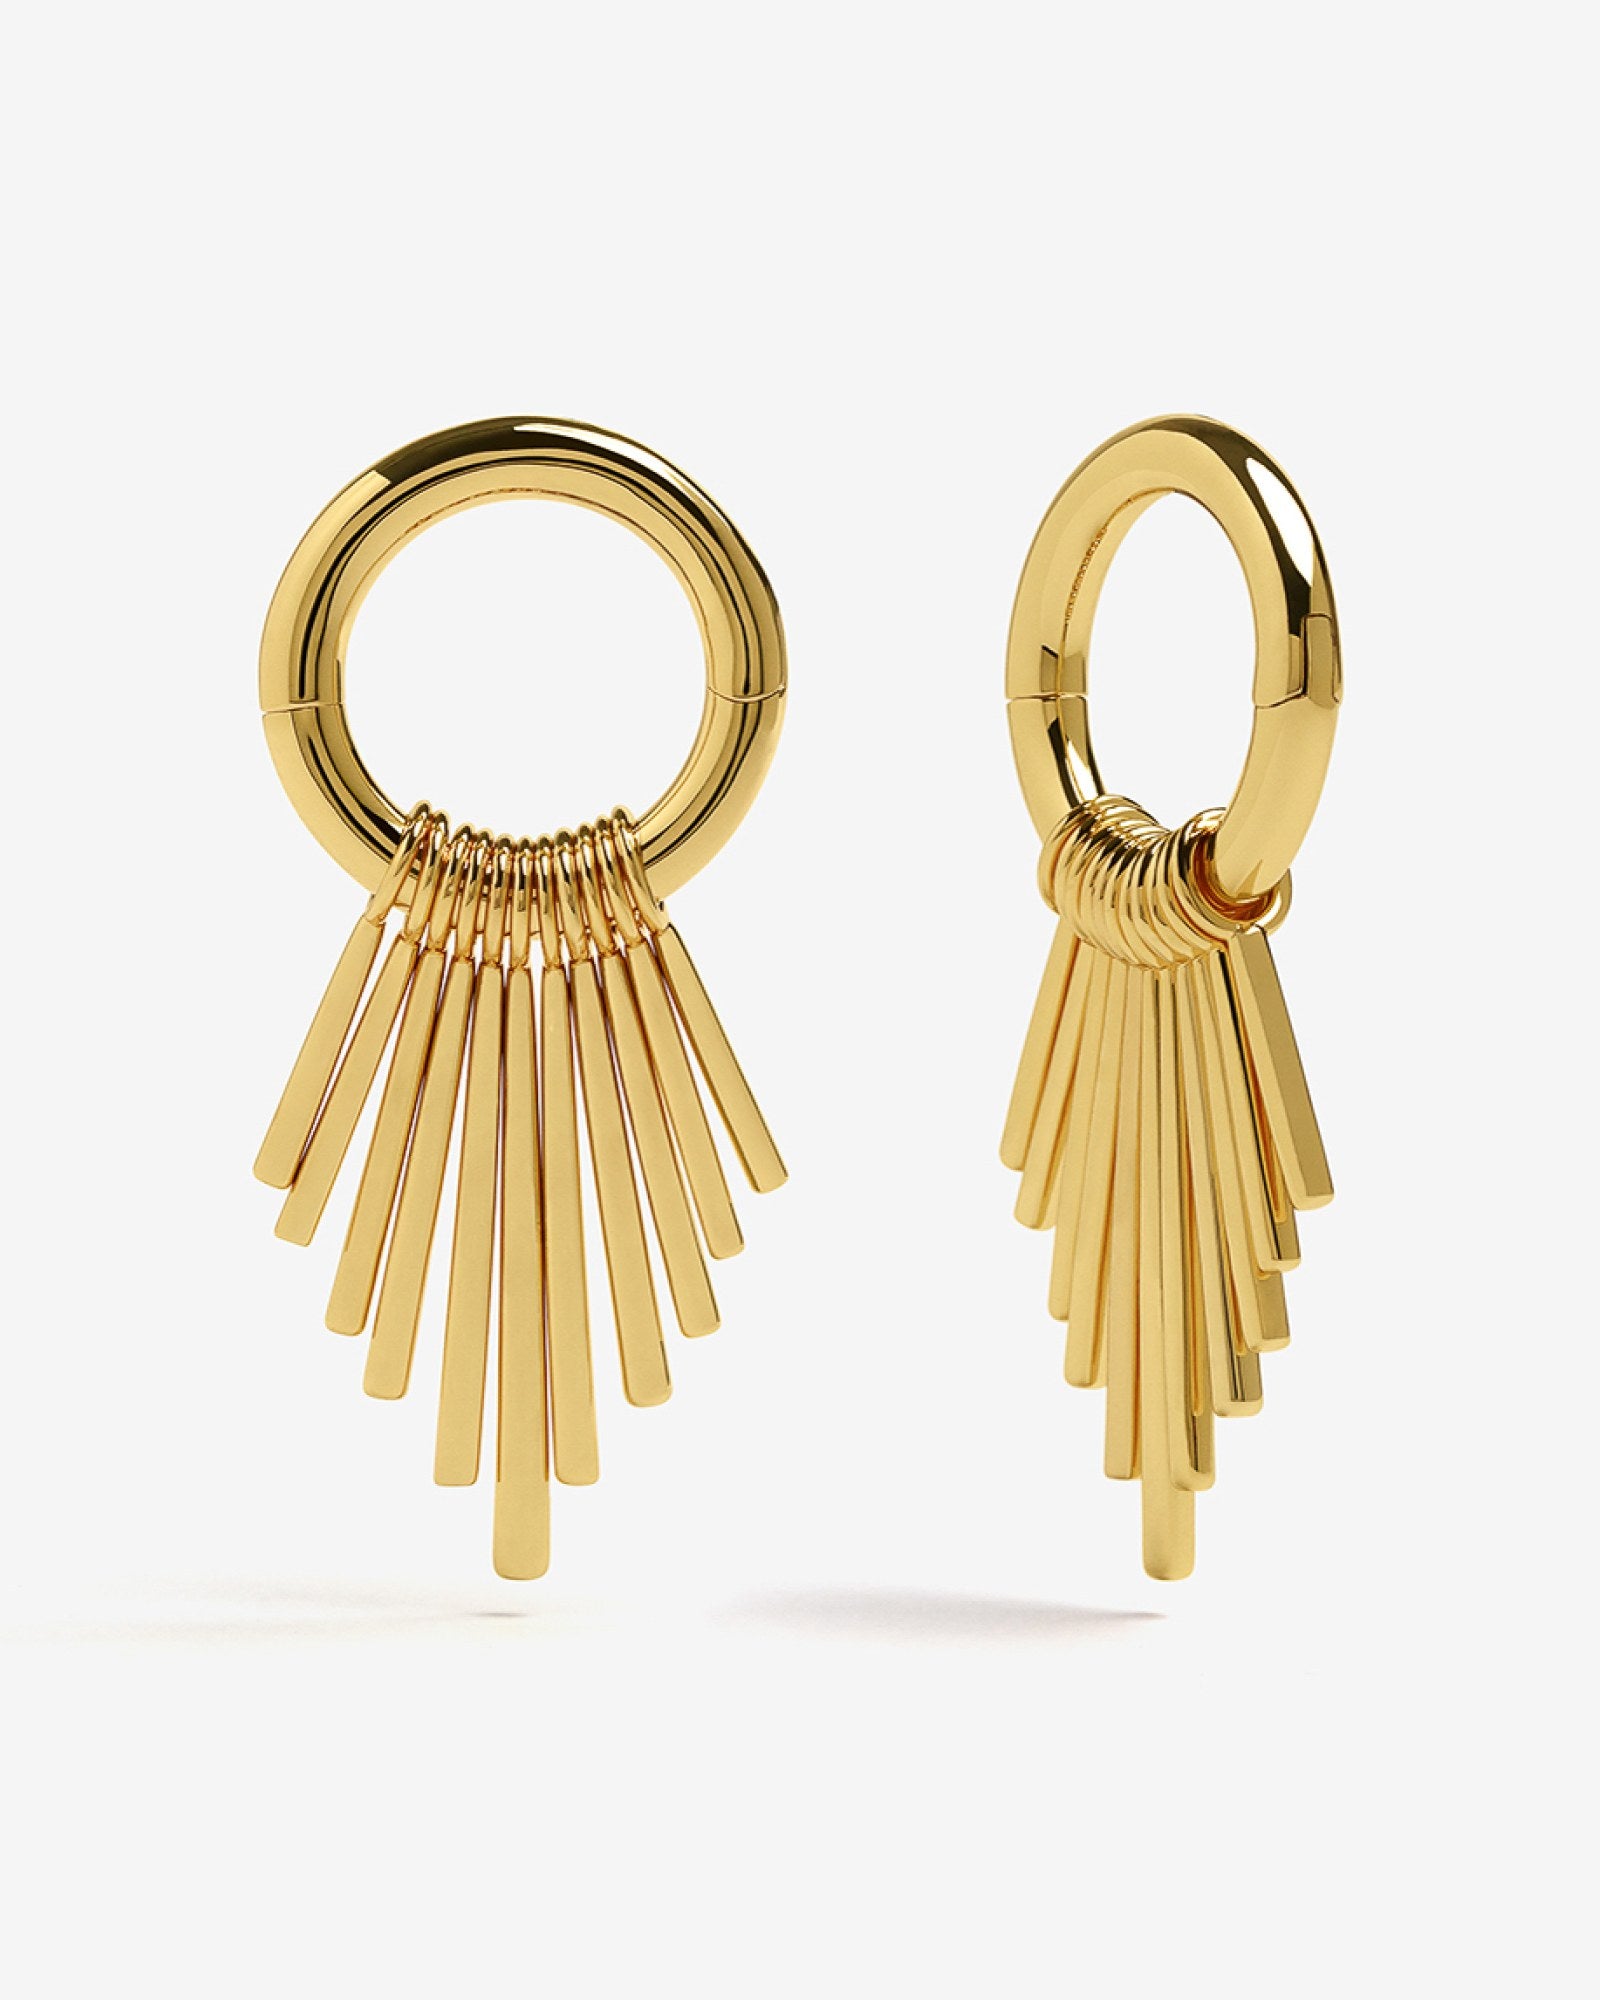 Classic Halo Hangers (3 Sizes) in Medium (6g) - Gold - Stretched Ear Jewelry by Ask & Embla